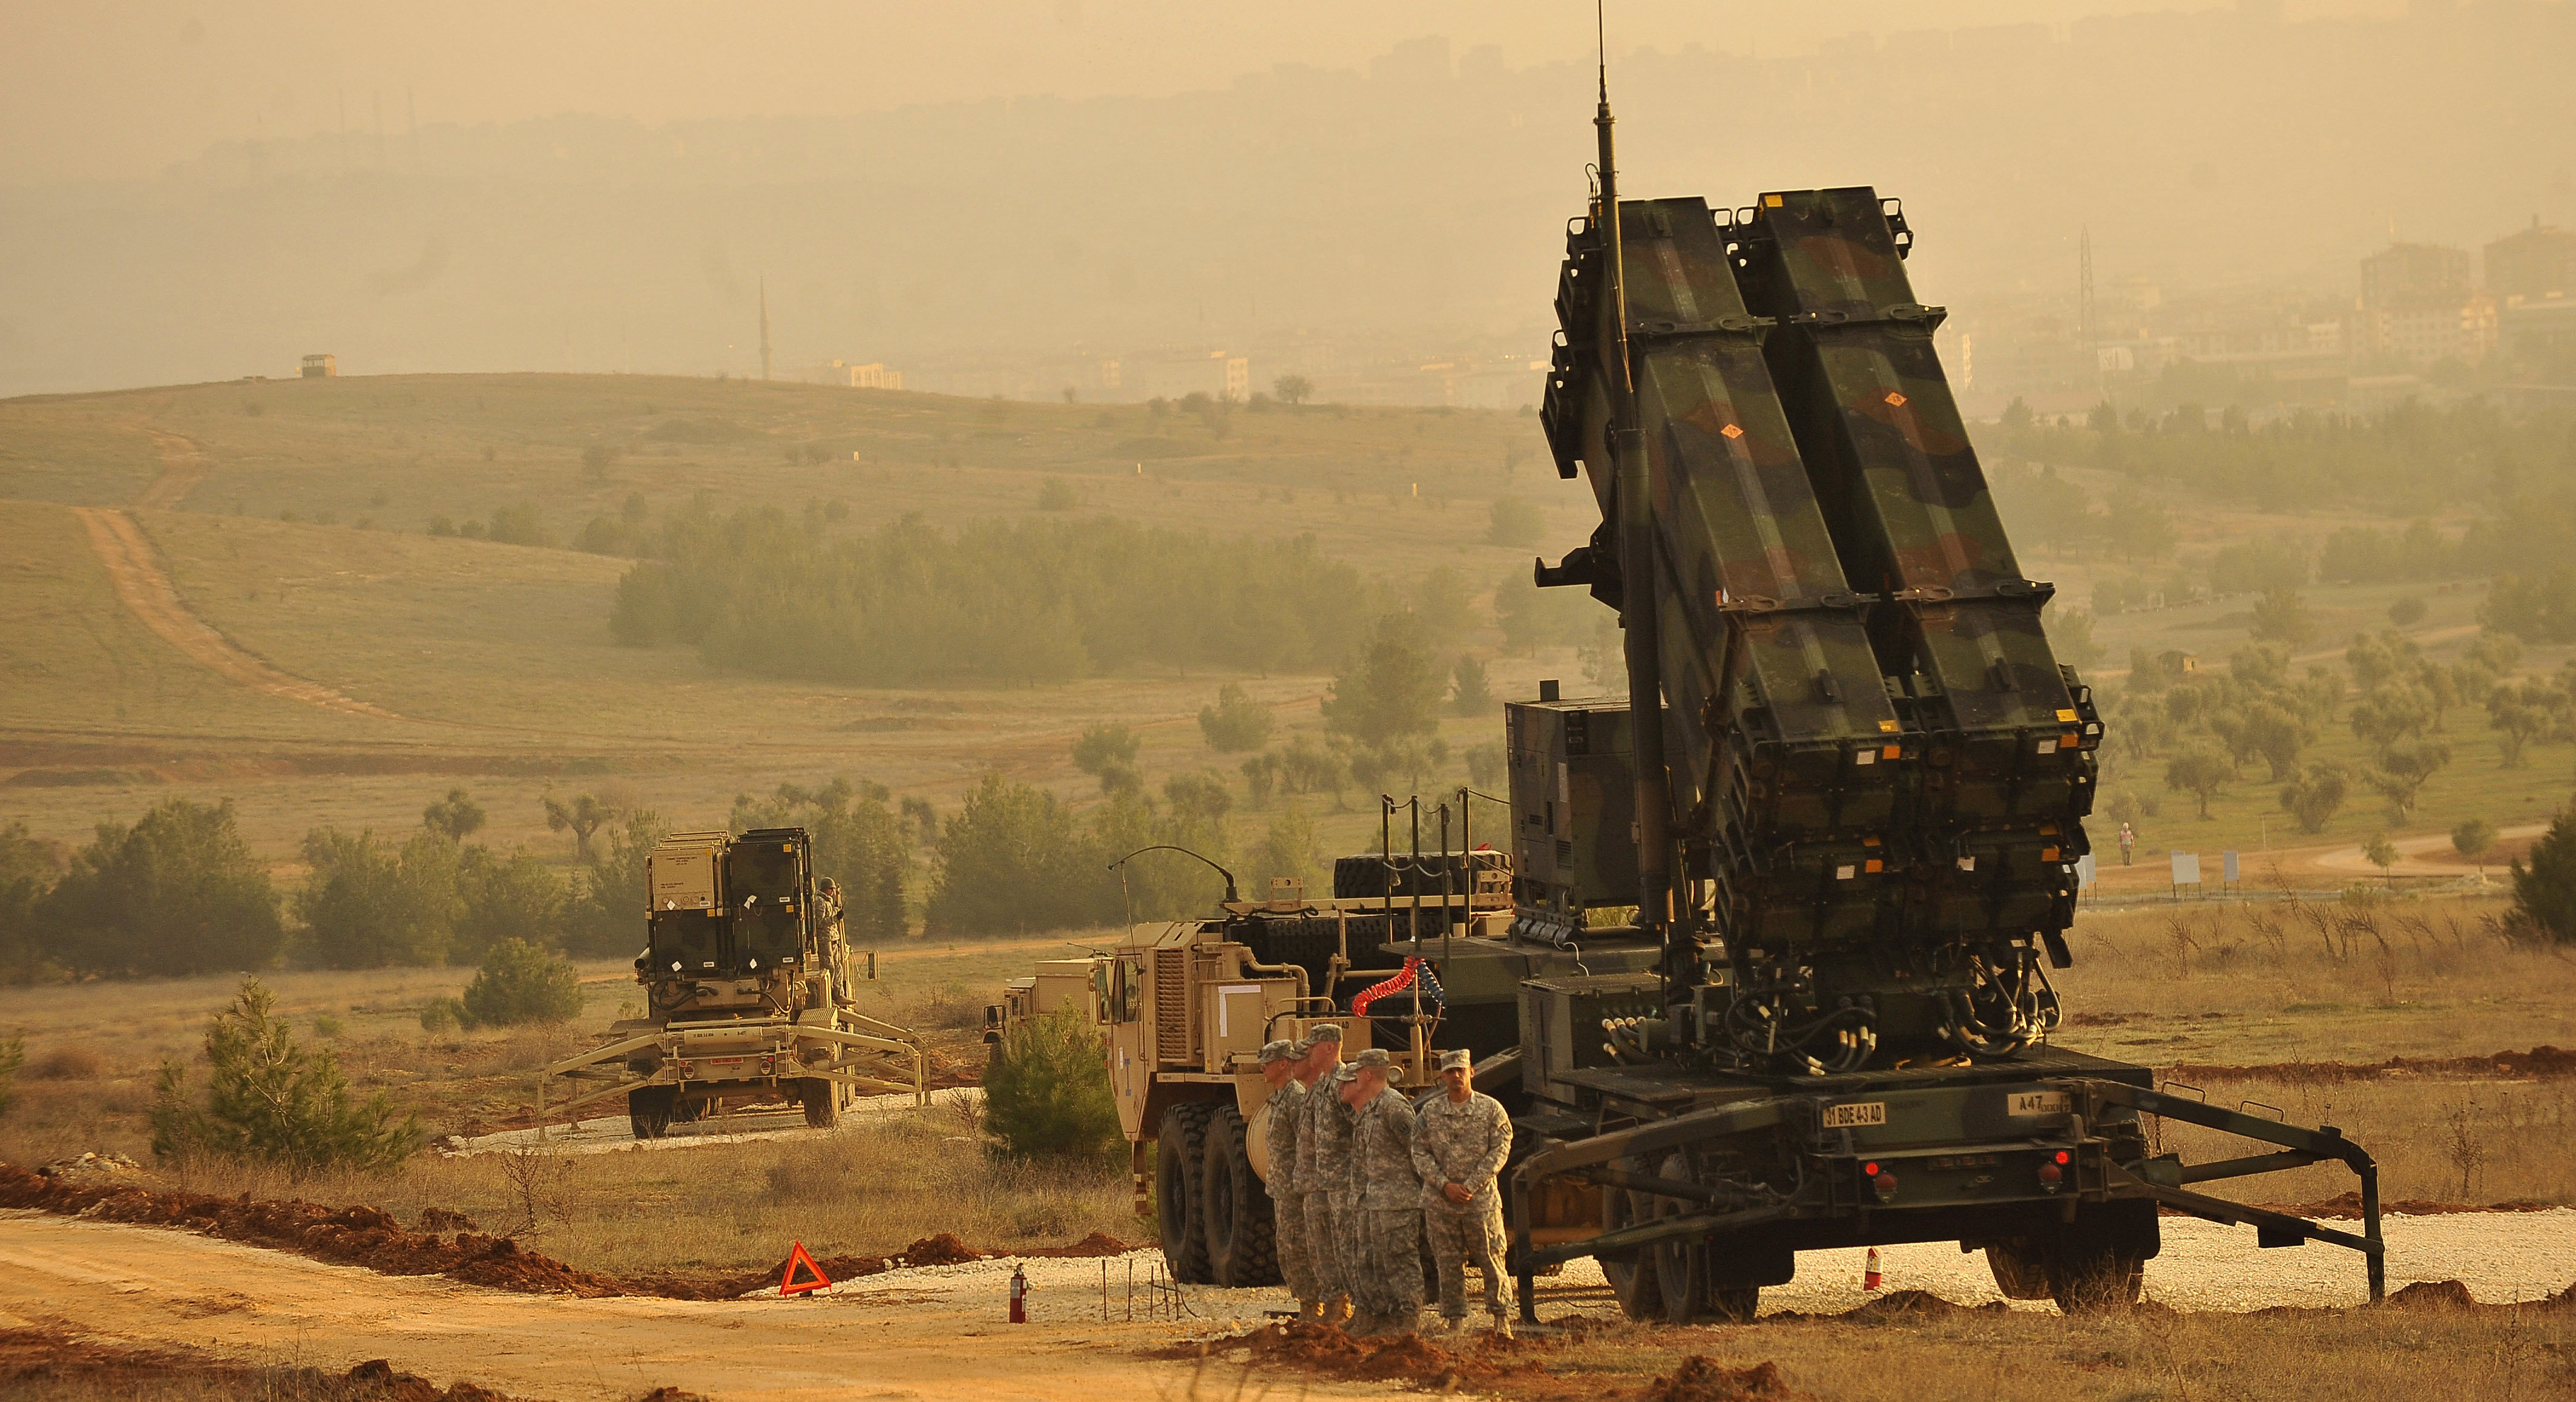 Six batteries of NATO-backed missile defense systems have been set up in southeastern Turkey to protect against aerial attacks from war-torn Syria (File)